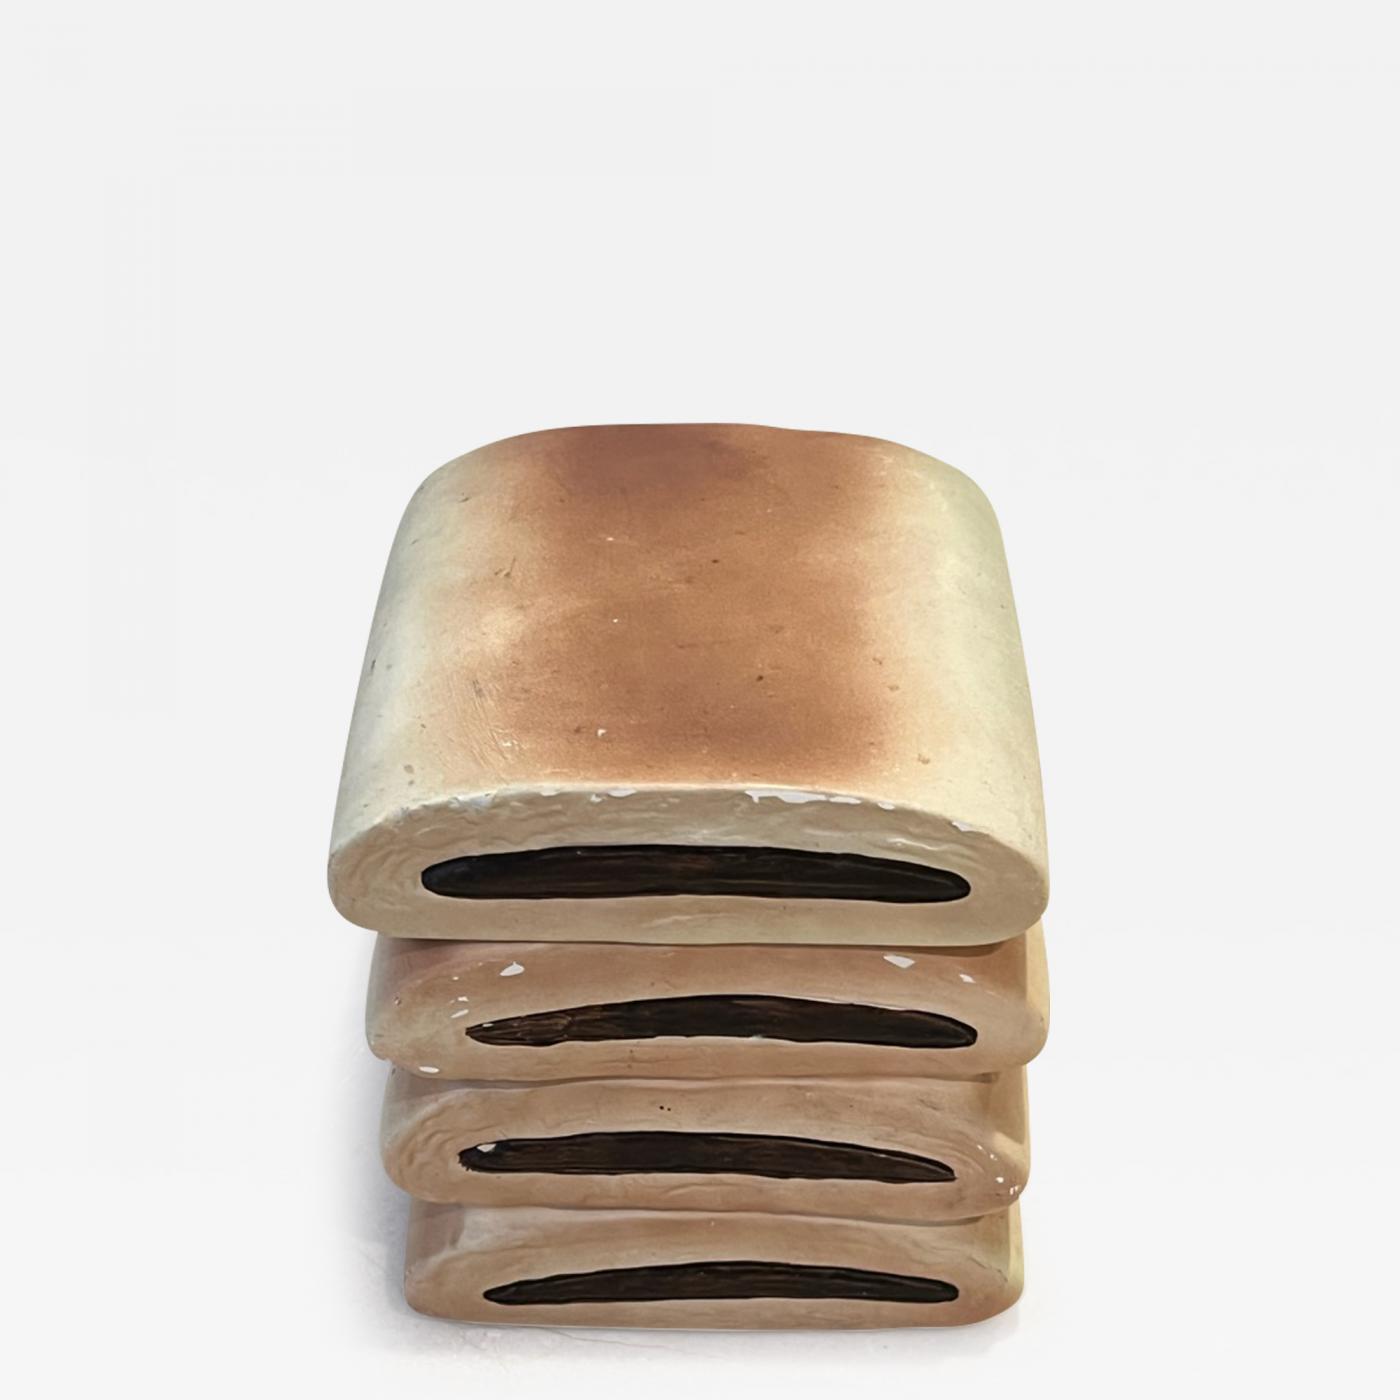 https://cdn.incollect.com/sites/default/files/zoom/CERAMIC-STACKED-FIG-NEWTONS-COOKIE-JAR-595016-2828551.jpg